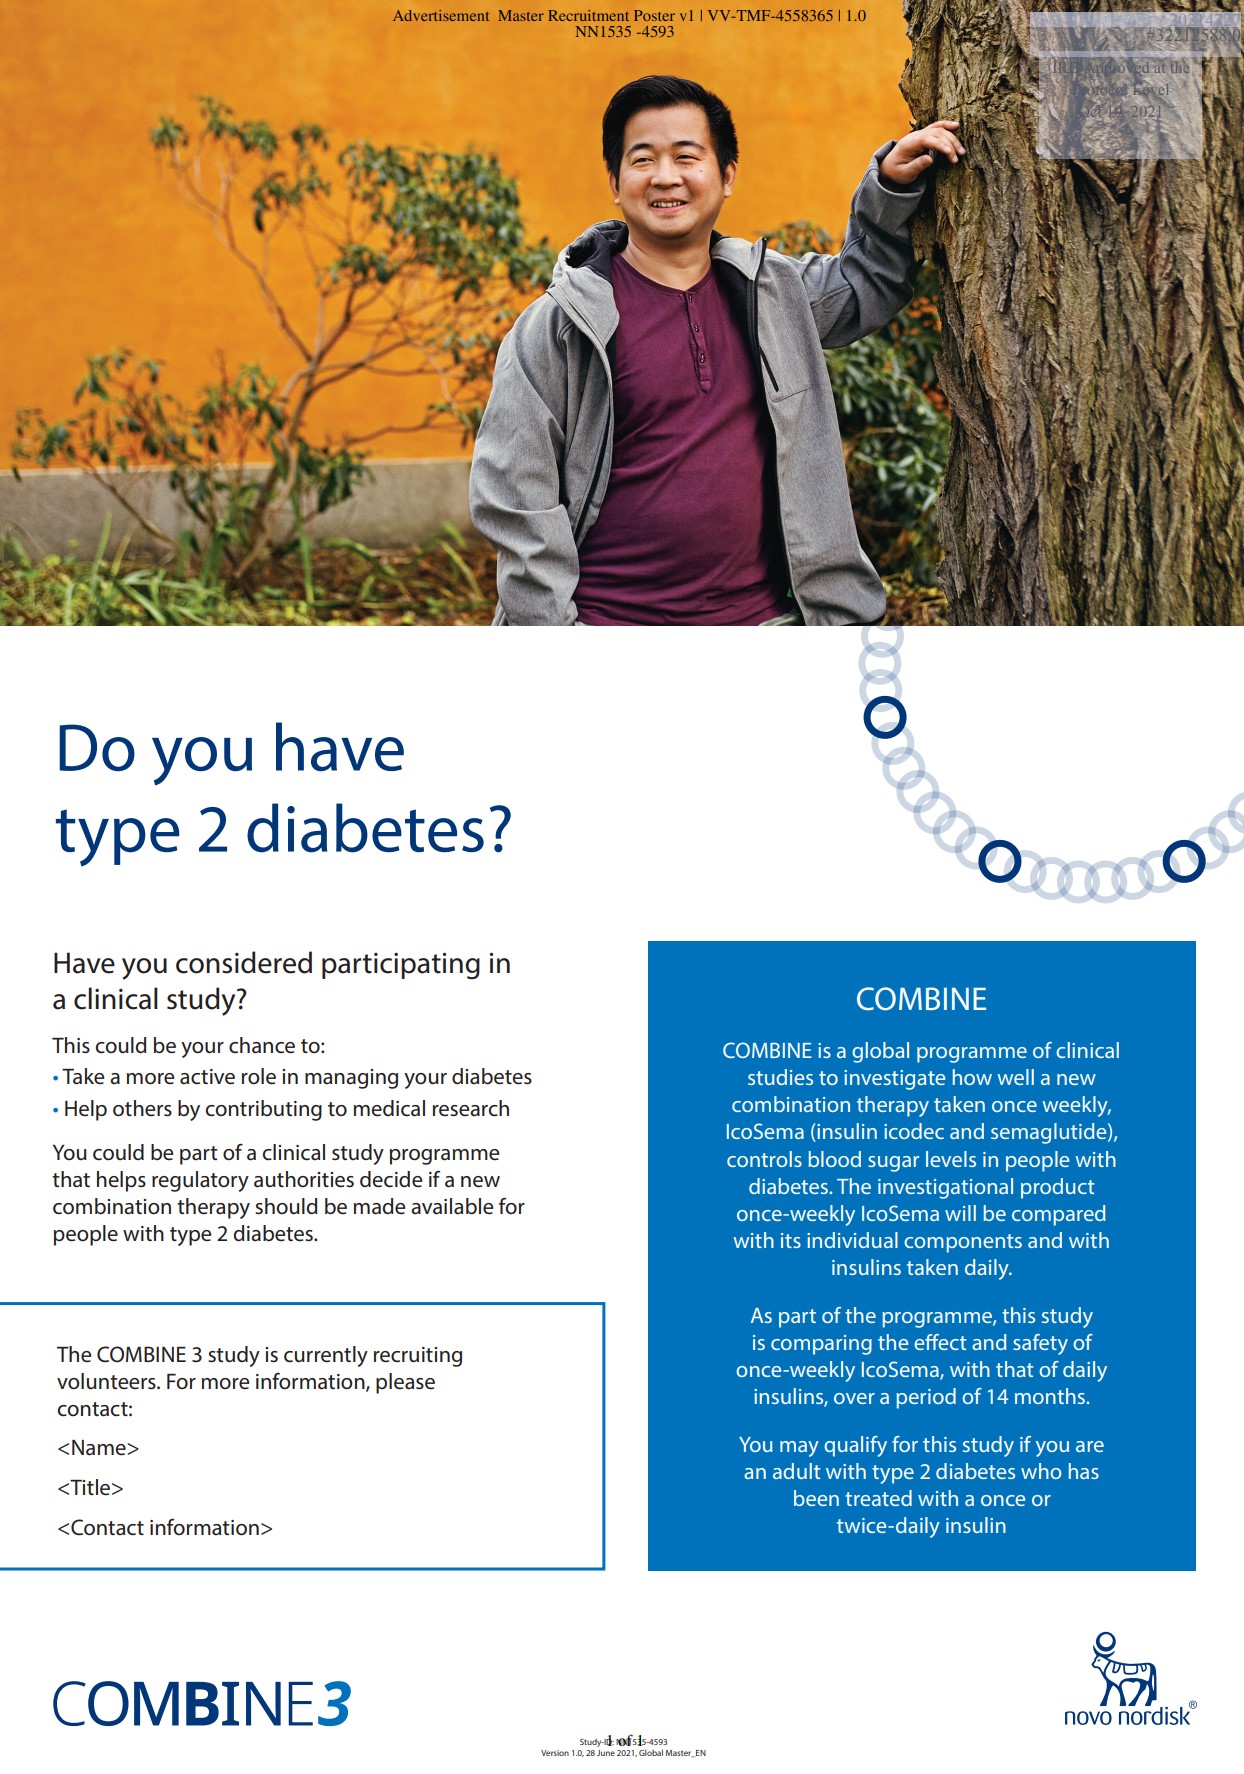 Type II Diabetes Inadequately Controlled with Daily Basal Insulin - Sugar Land TX